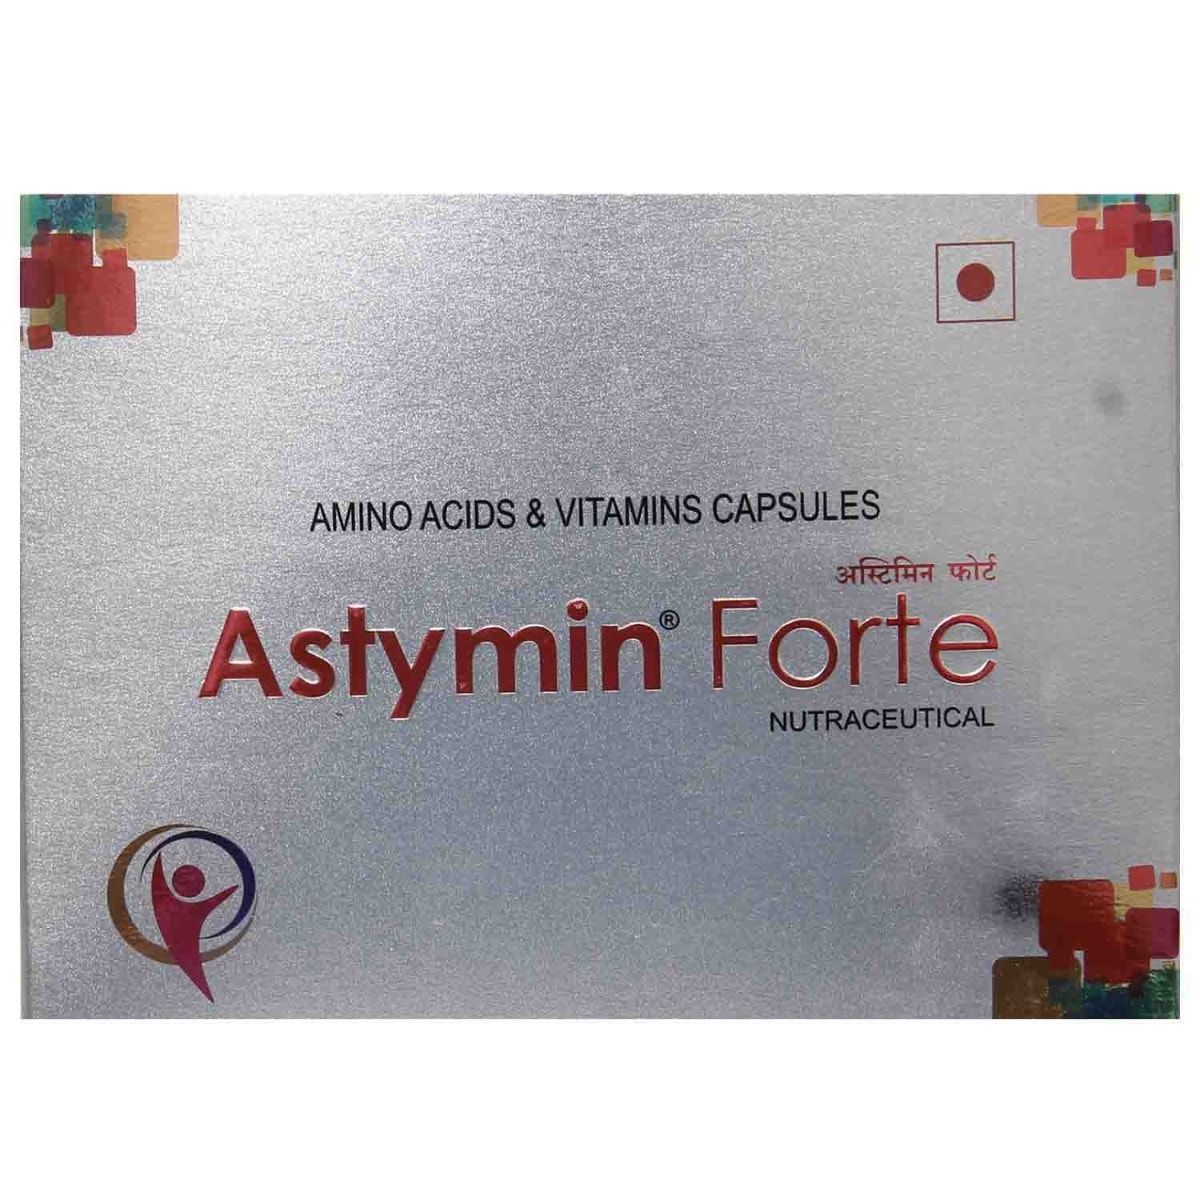 Astymin Forte Capsule 15's Price, Uses, Side Effects, Composition ...